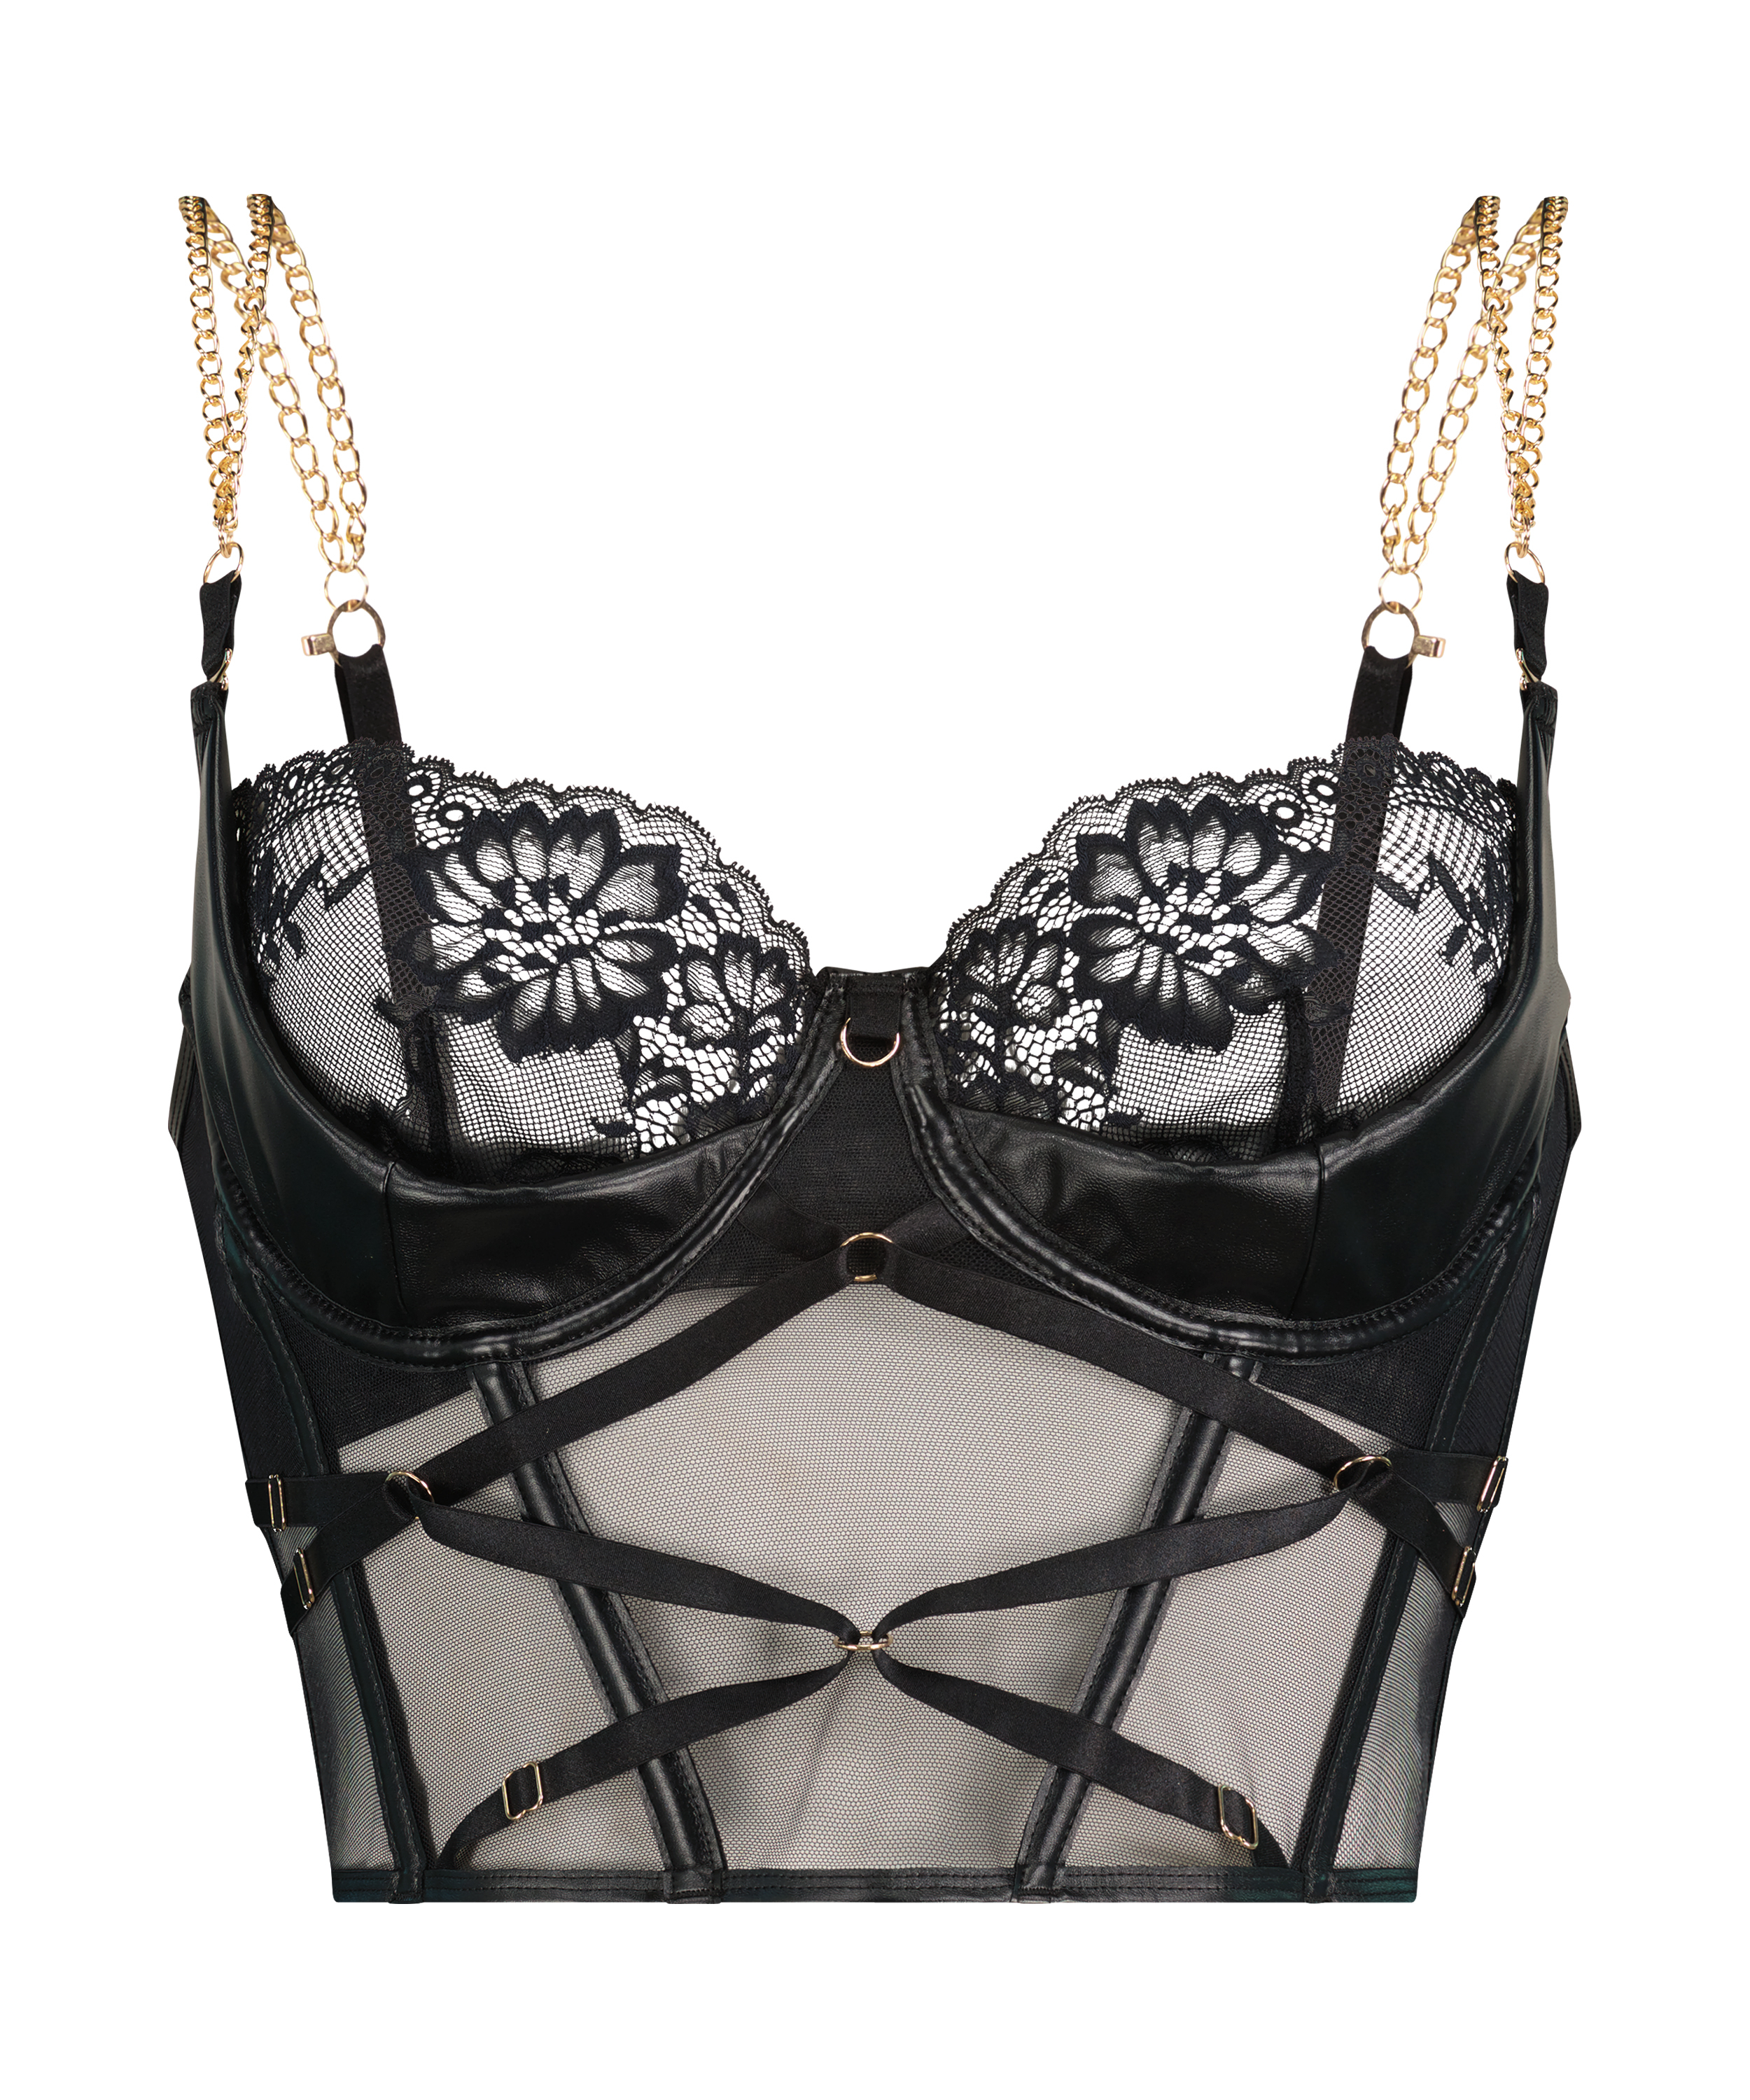 Private Hecate Bustier for £15 - Bodies & Bustiers - Hunkemöller